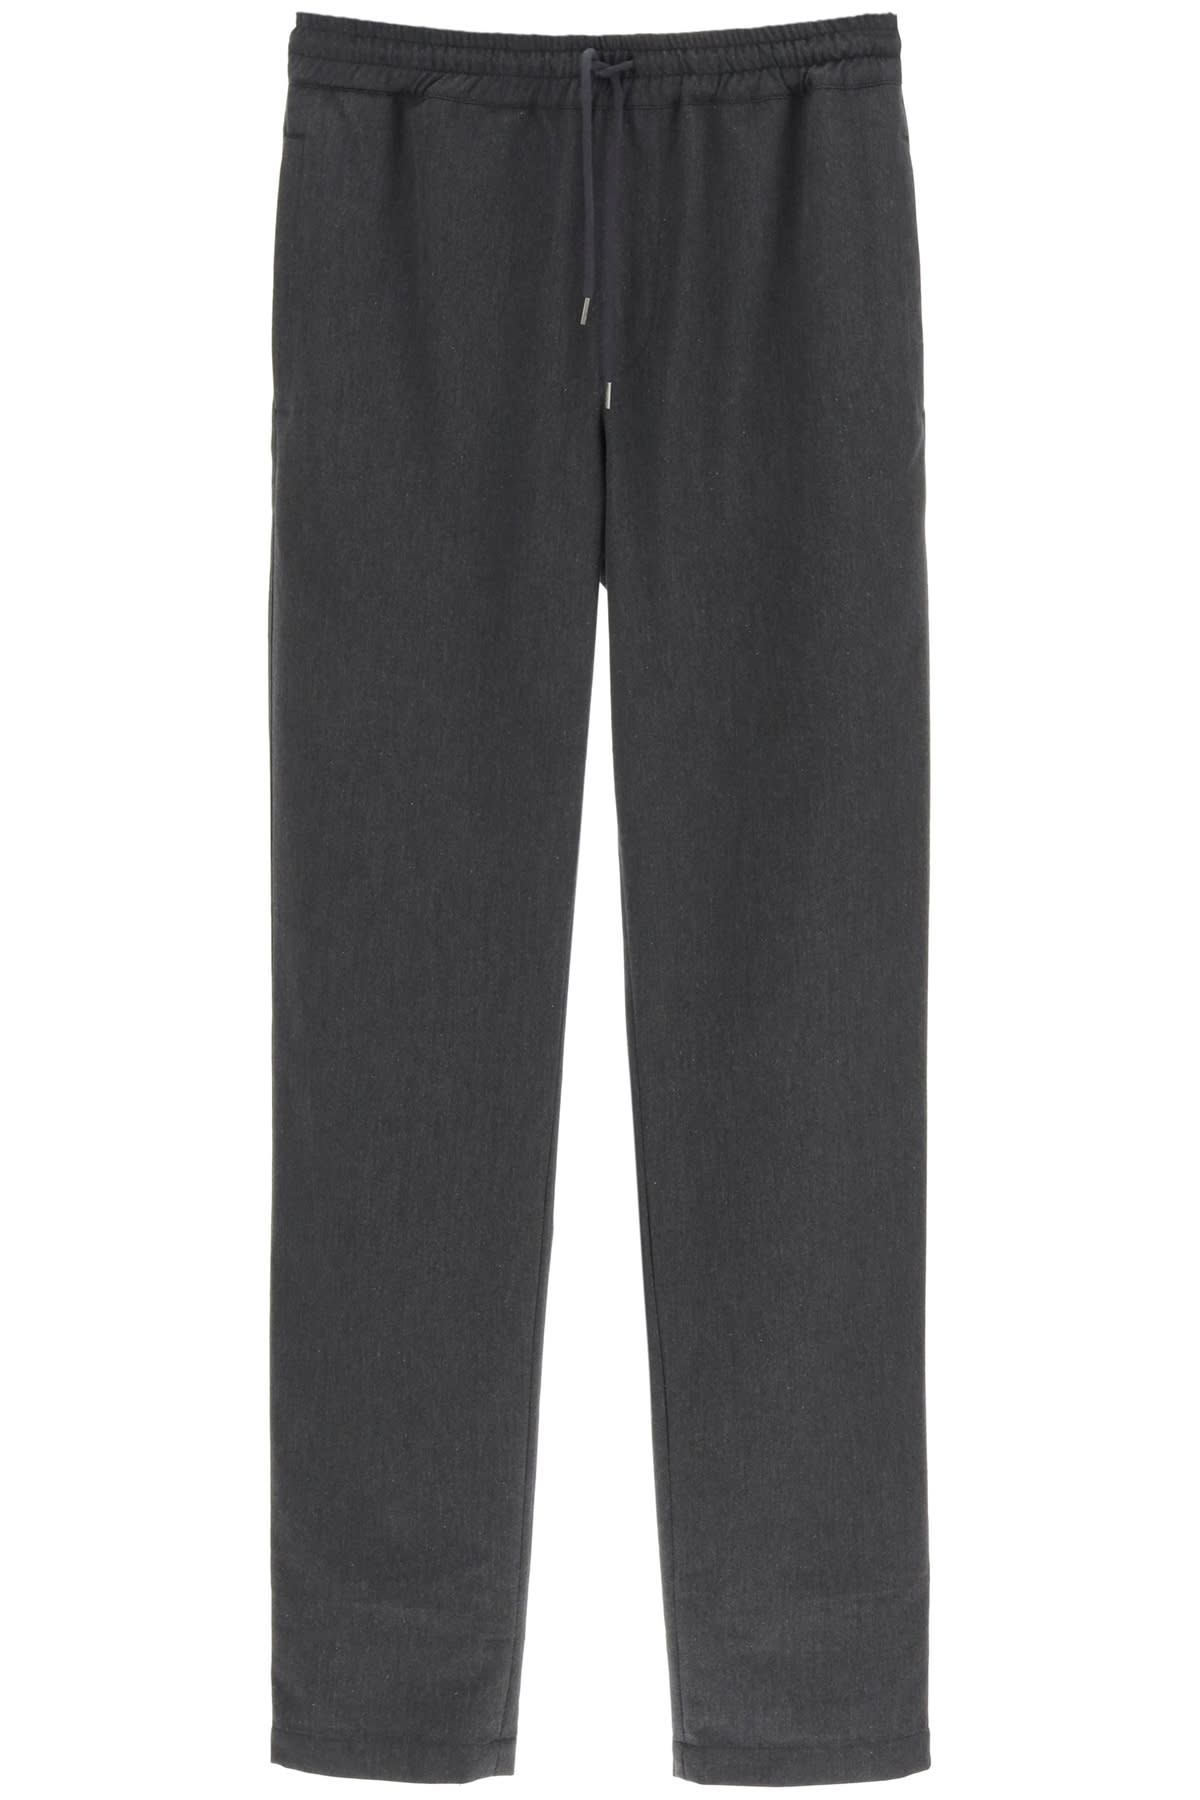 A.P.C. New Kablan Trousers